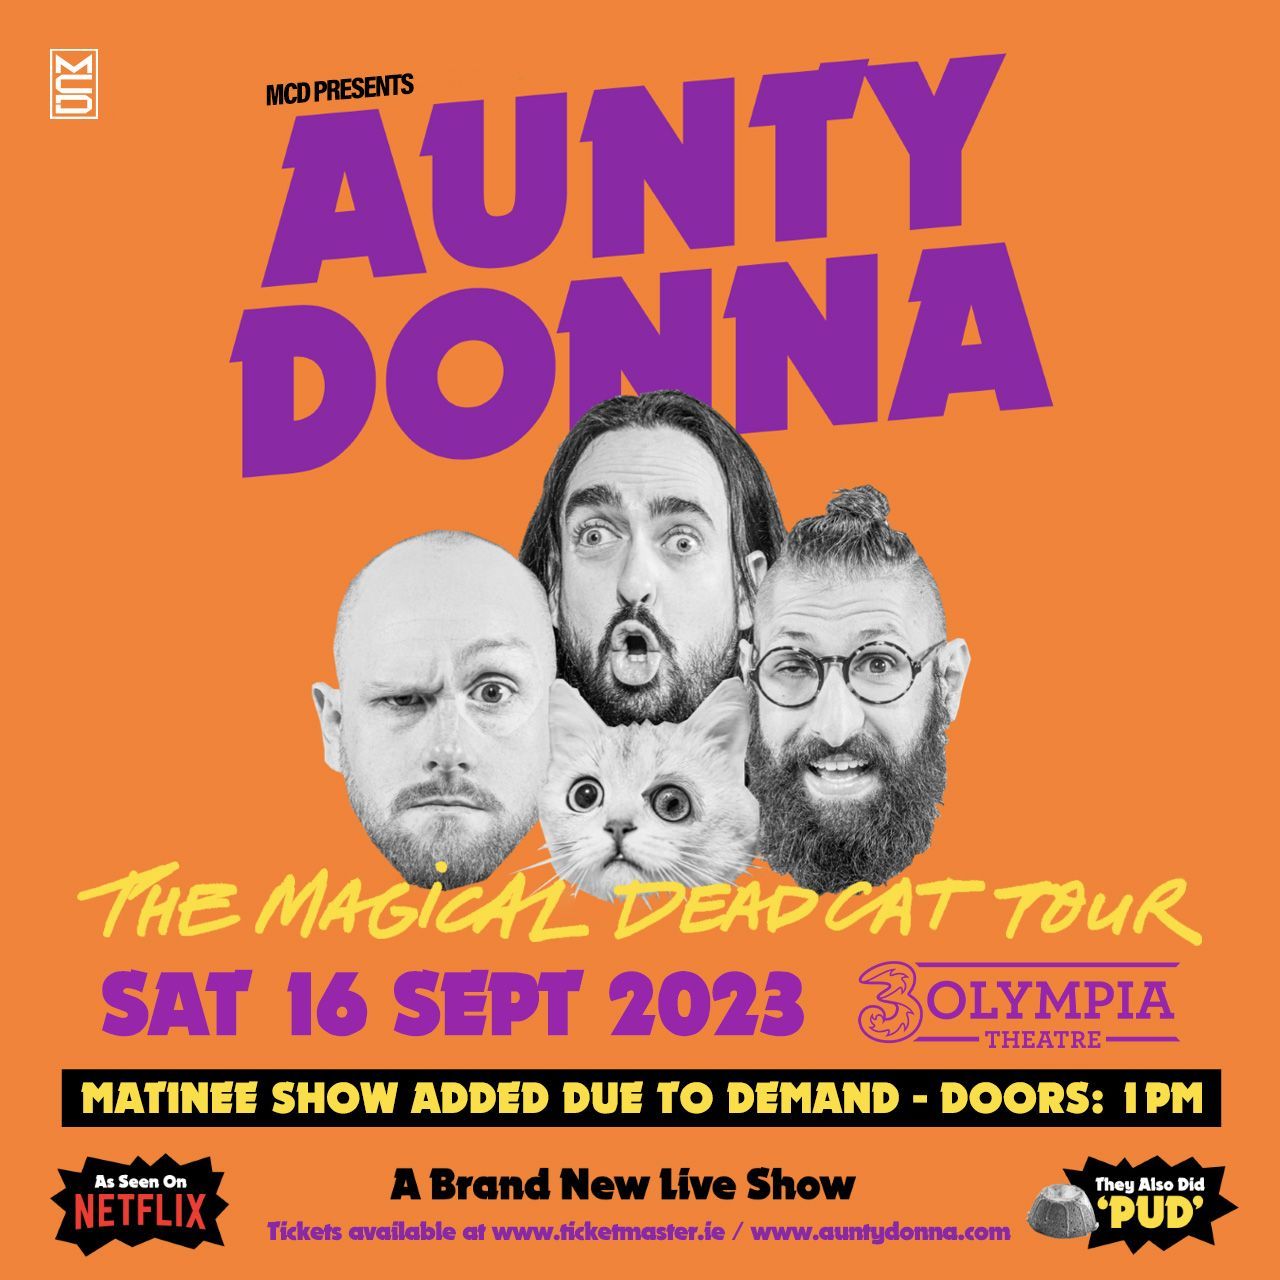 AUNTY DONNA THE MAGICAL DEAD CAT TOUR  DUE TO PHENOMENAL DEMAND  EXTRA DATE ADDED AT 3OLYMPIA THEATRE DULBIN